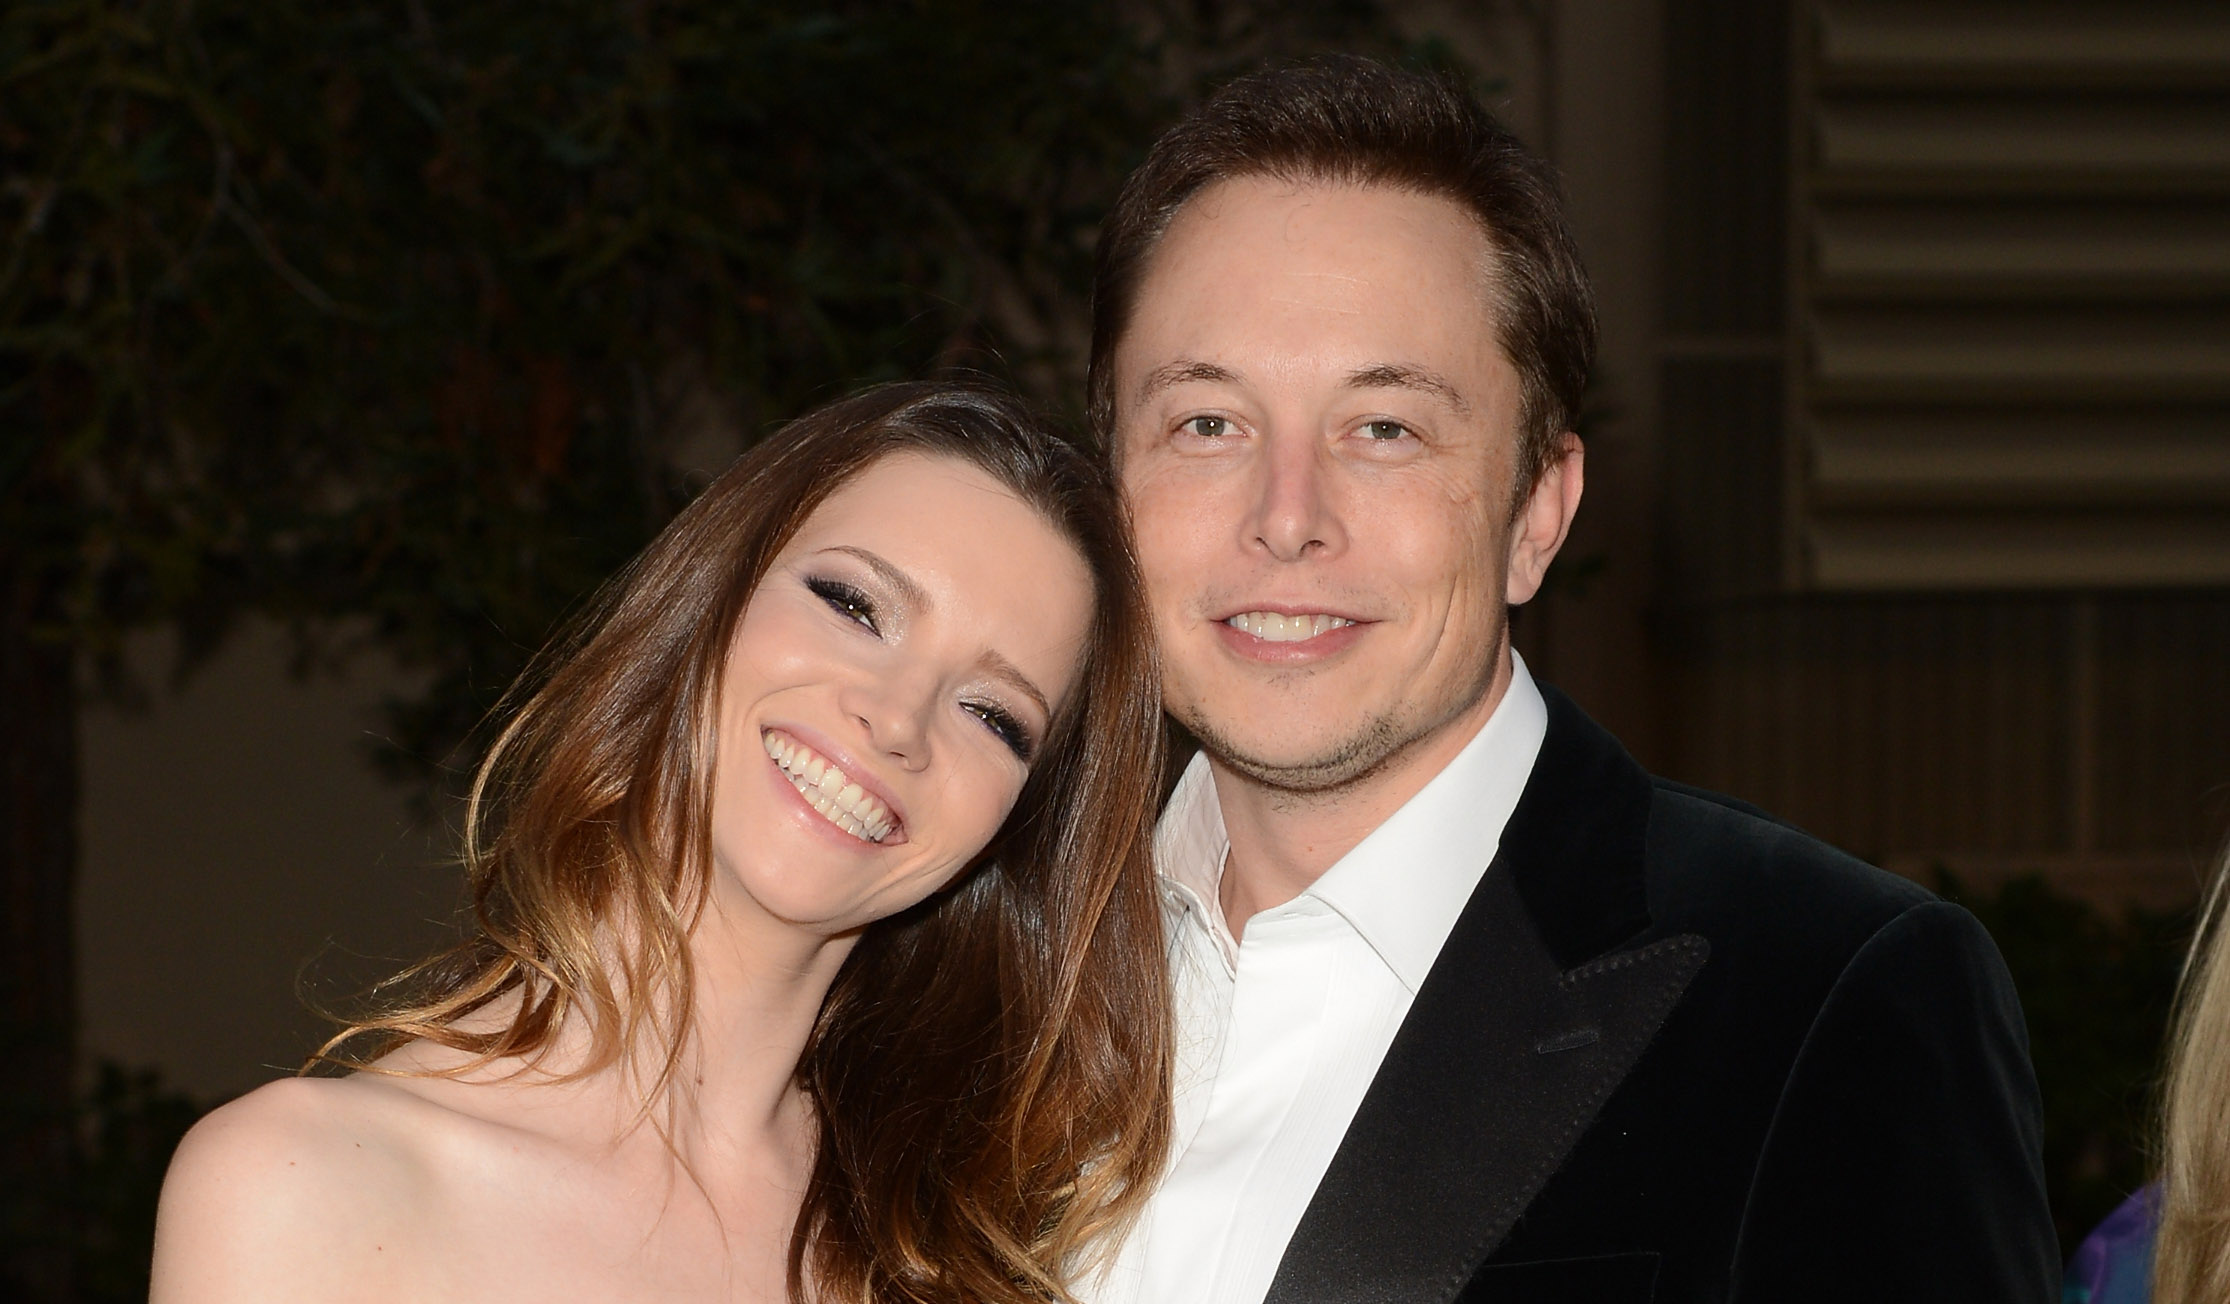 Elon Musk S Ex Wife Denies Being Hand Chosen By Ghislaine Maxwell To Be His Child Bride Brobible